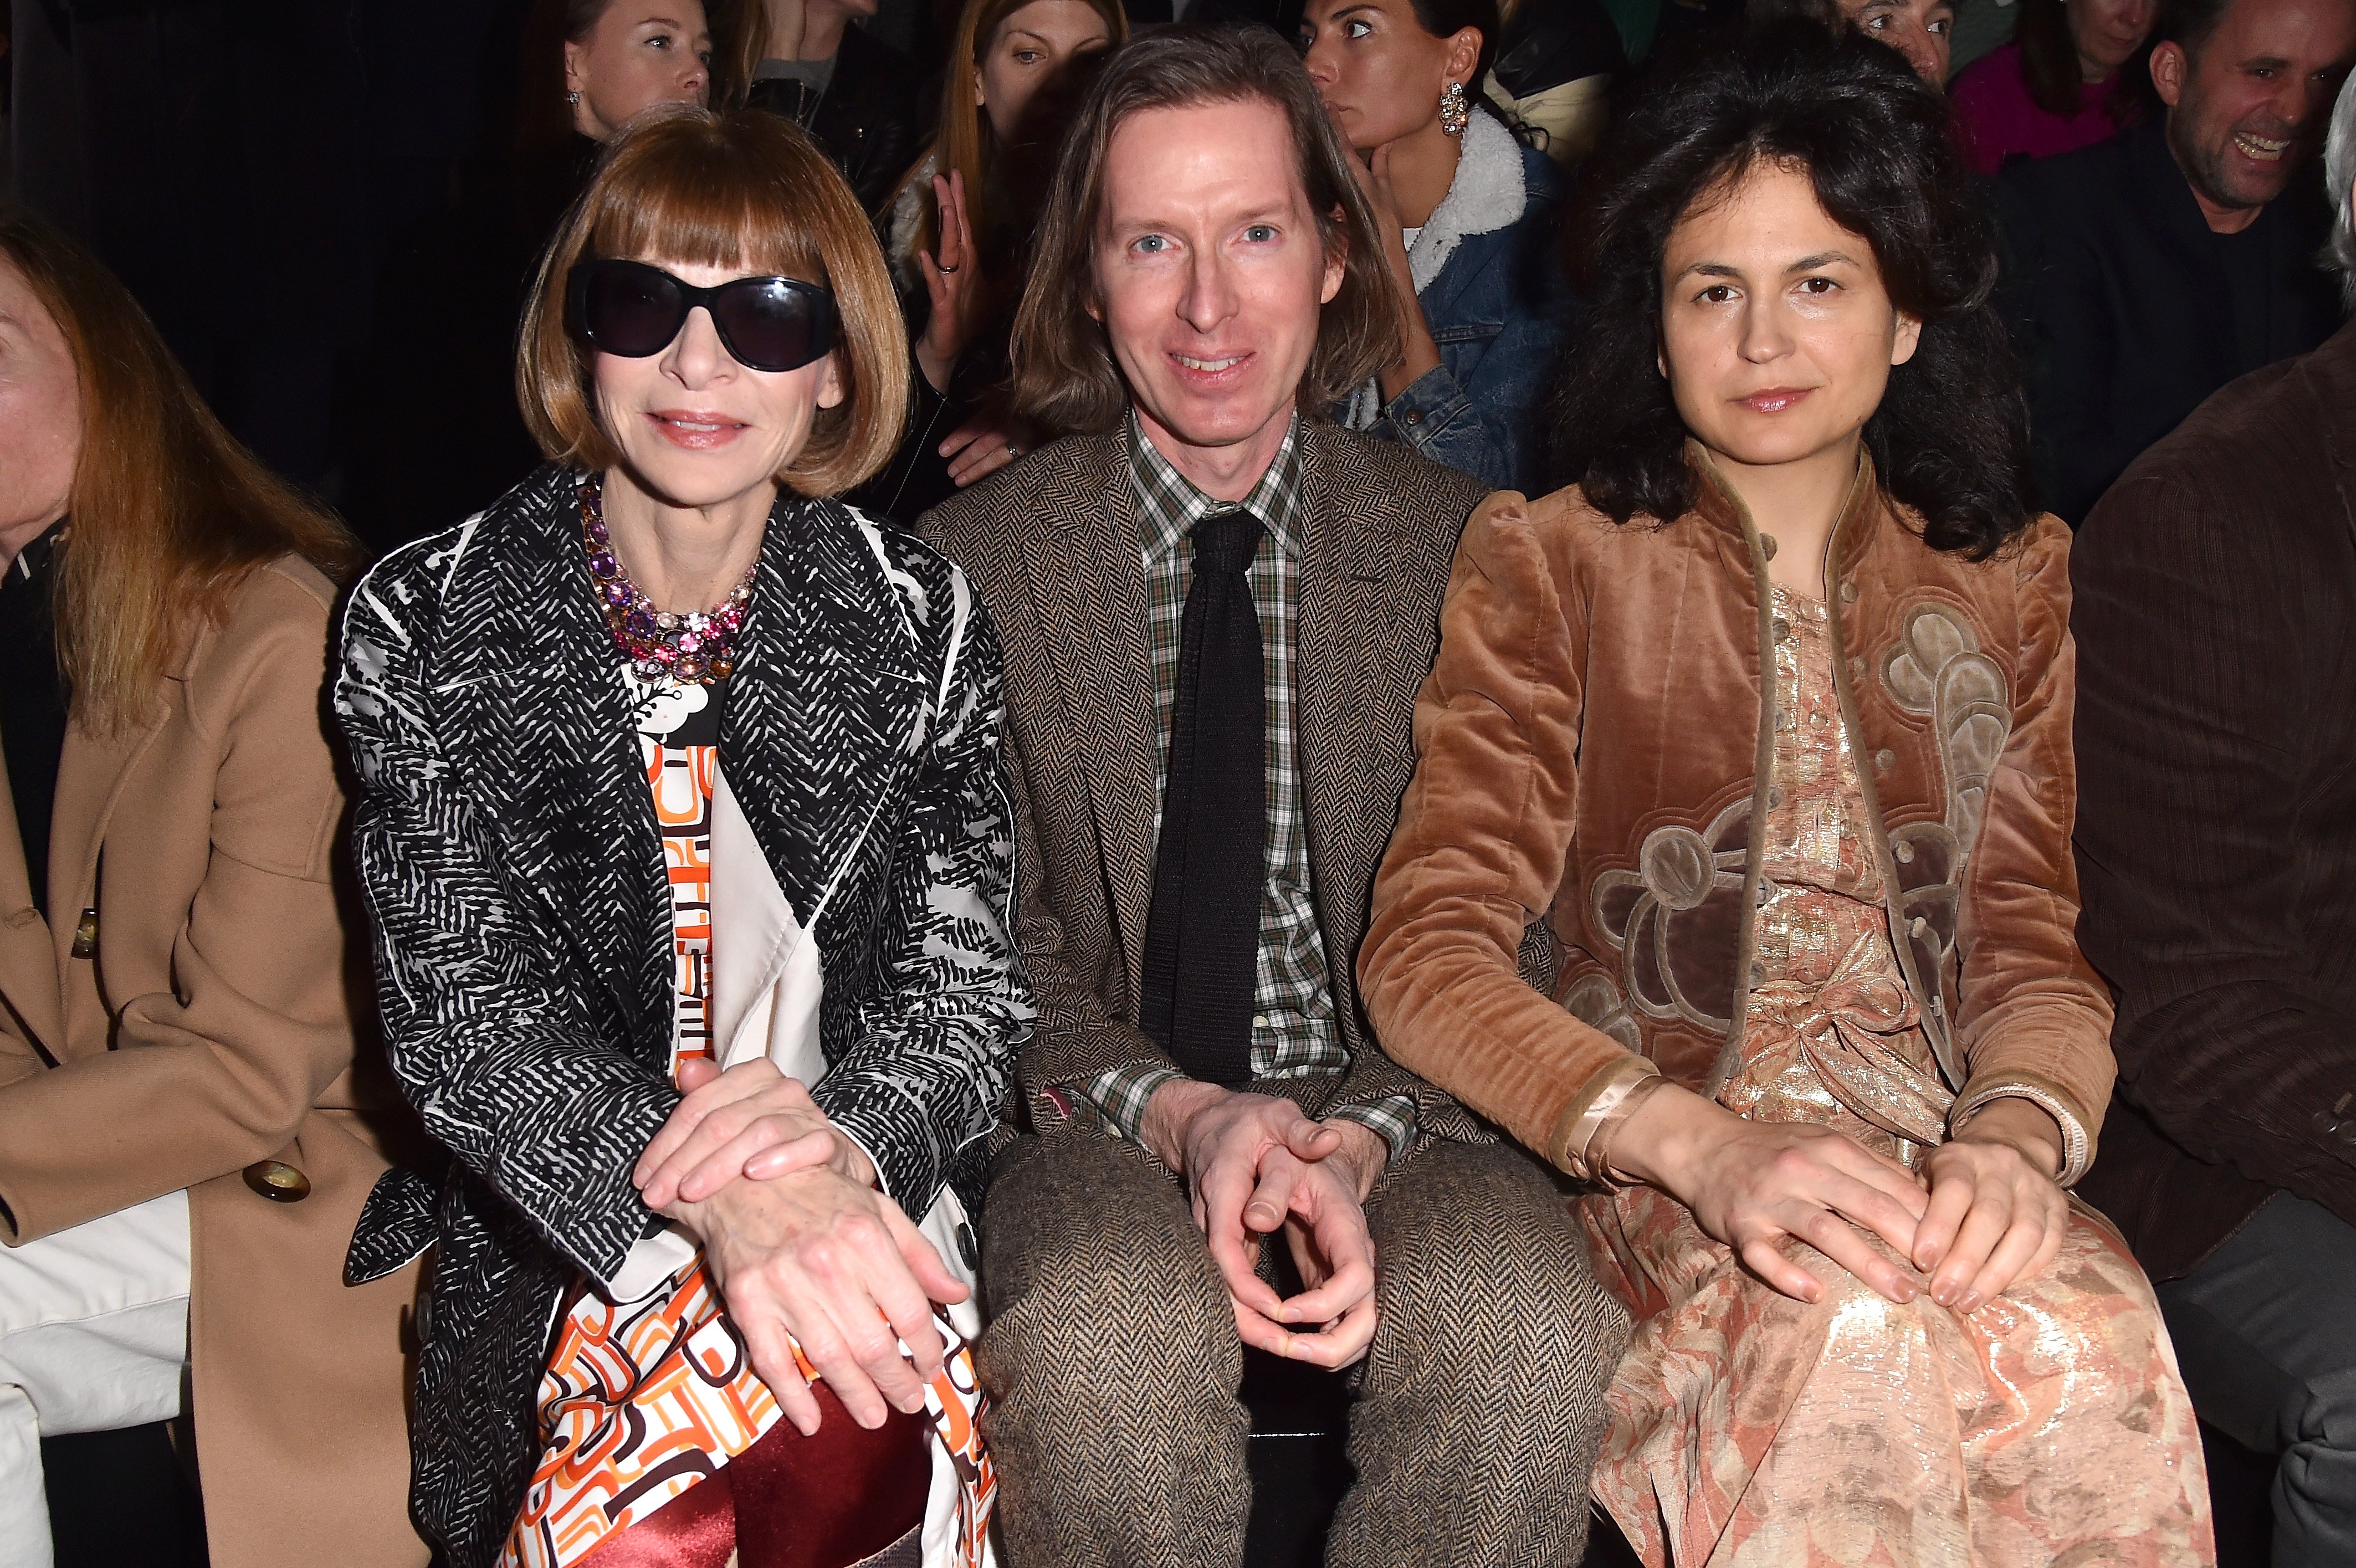 Wes Anderson, his wife Juman Malouf and Anna Wintour, at Prada Fall/Winter 2018 Womenswear Fashion Show on February 22, 2018 in Milan. | Source: Getty Images